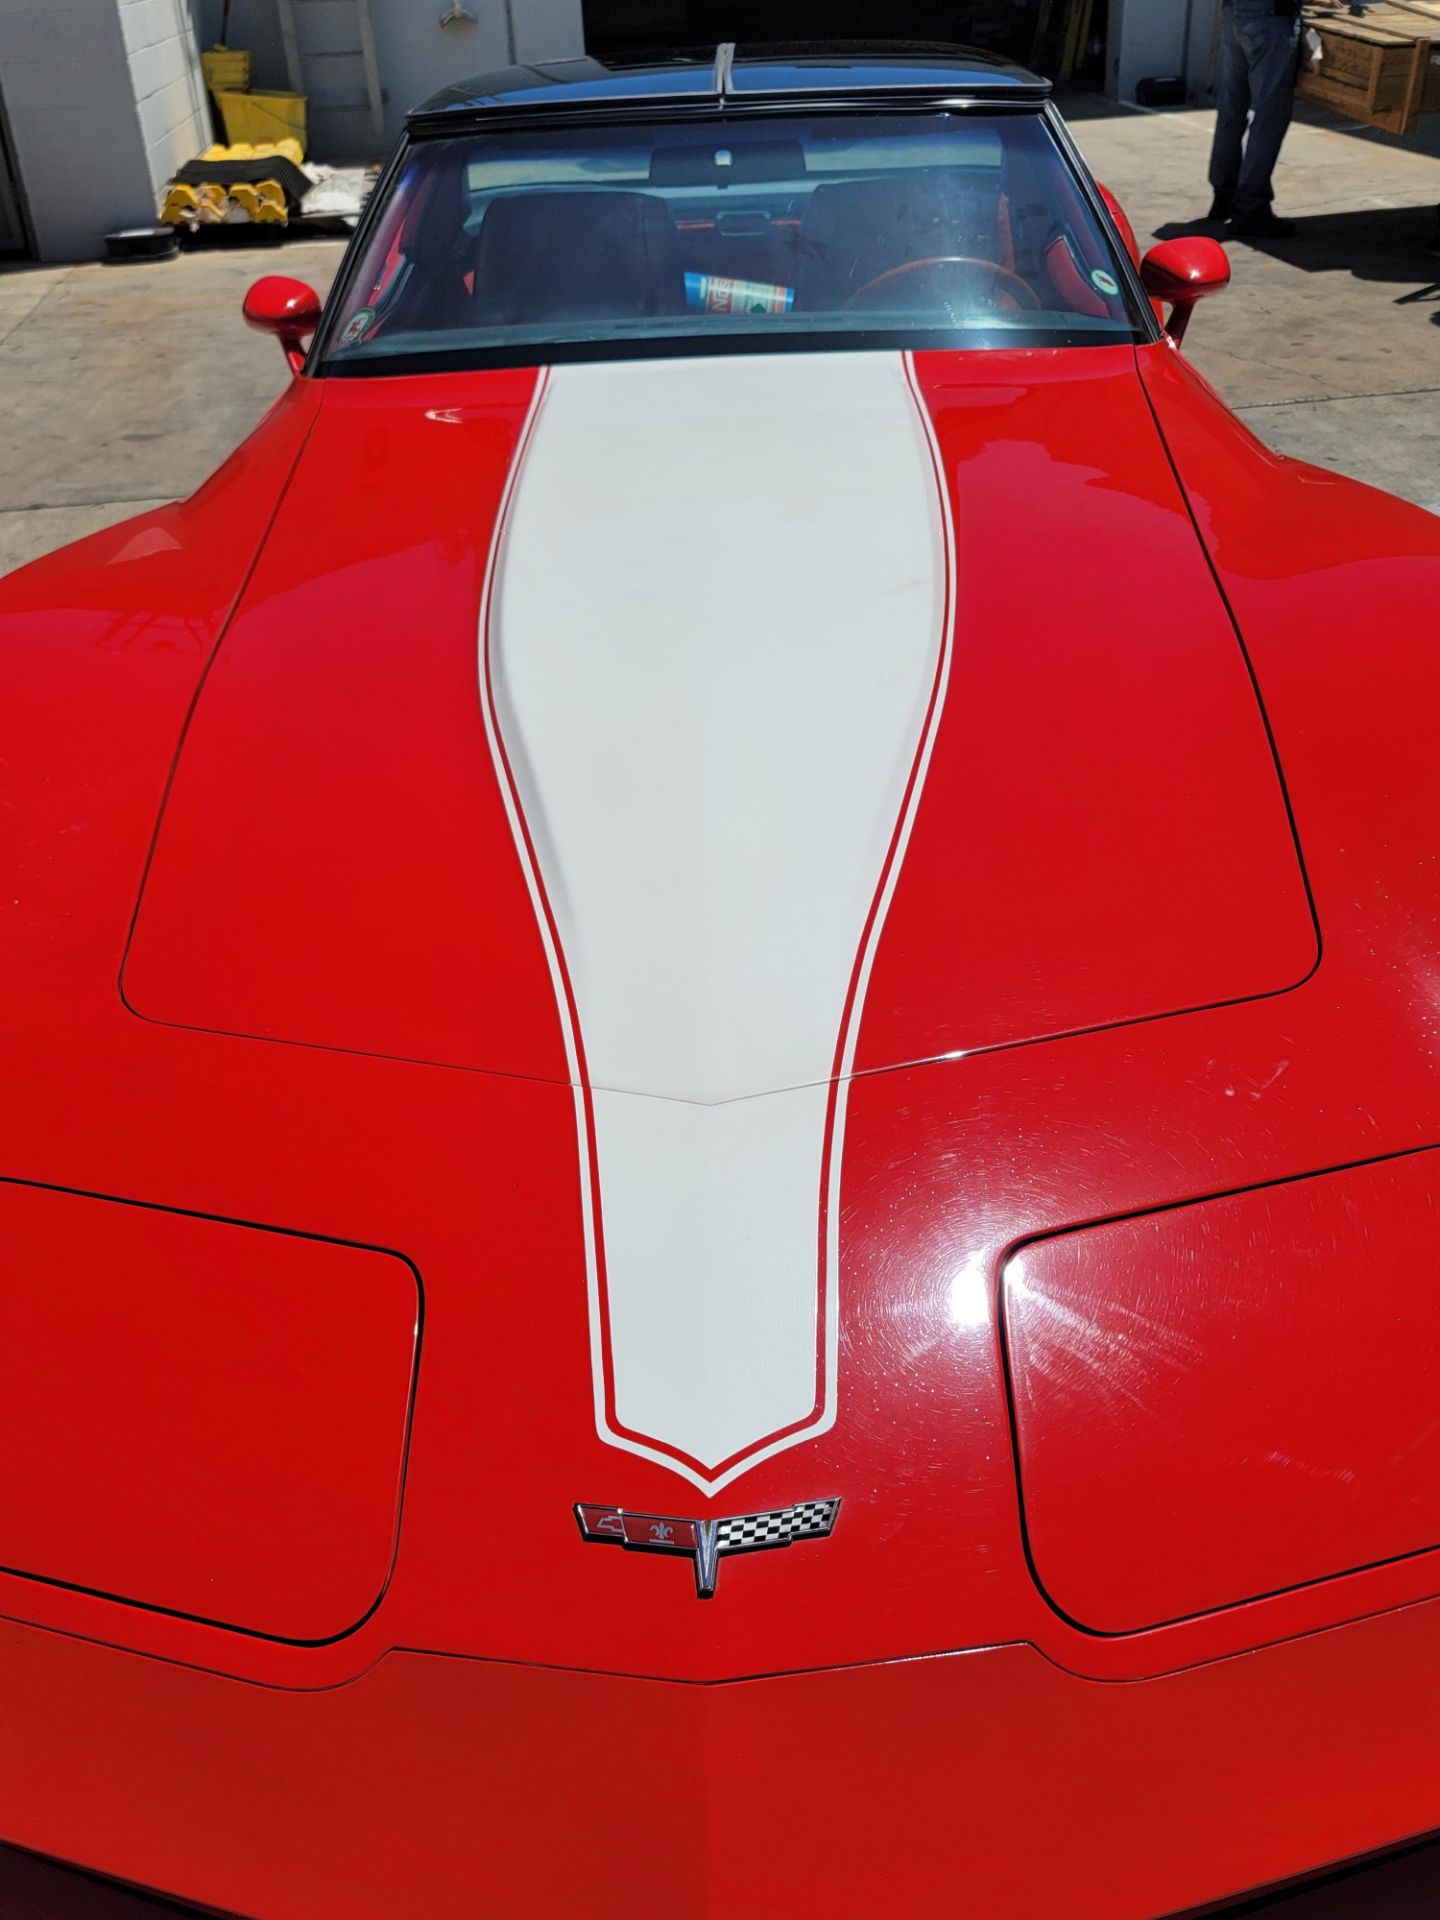 1980 CHEVROLET CORVETTE, WAS VIC EDELBROCK'S PERSONAL CAR BOUGHT FOR R&D, RED INTERIOR, TITLE ONLY. - Image 15 of 70